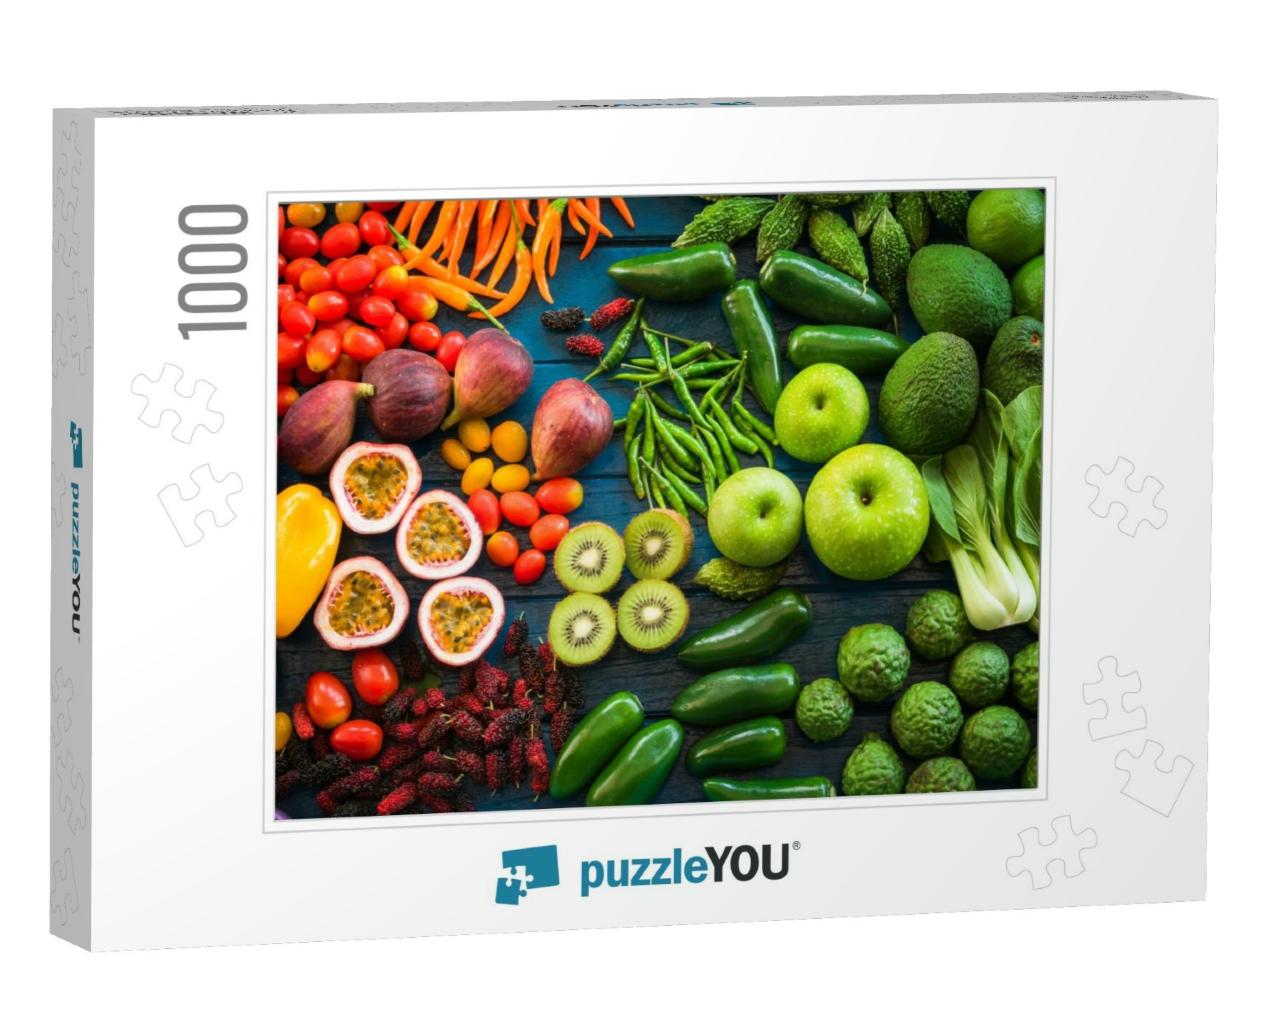 Flat Lay of Fresh Fruits & Vegetables for Background, Dif... Jigsaw Puzzle with 1000 pieces